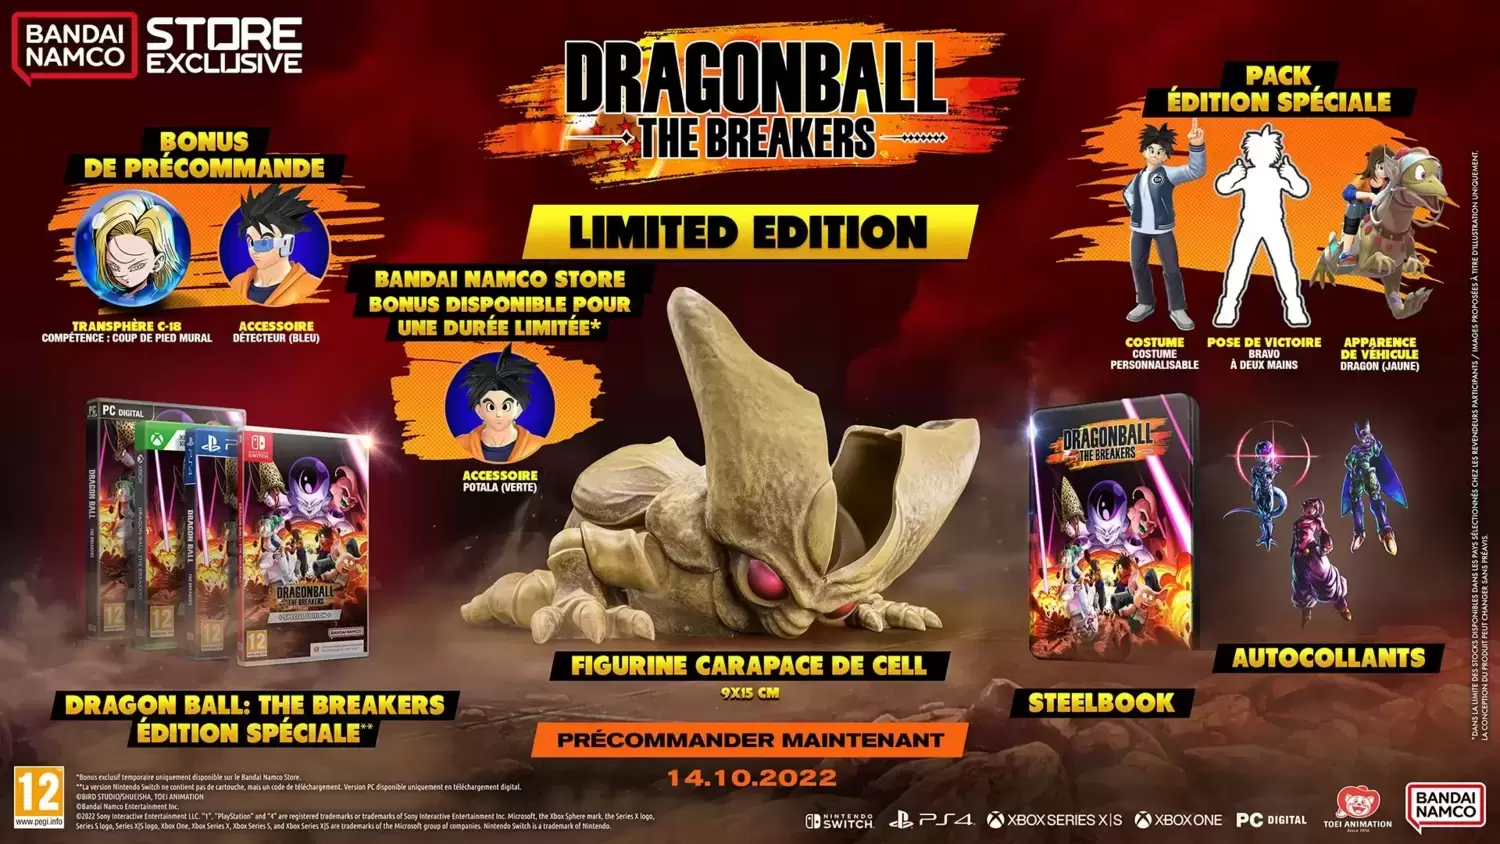 PS4 Games - Dragon Ball: The Breakers - Limited Edition